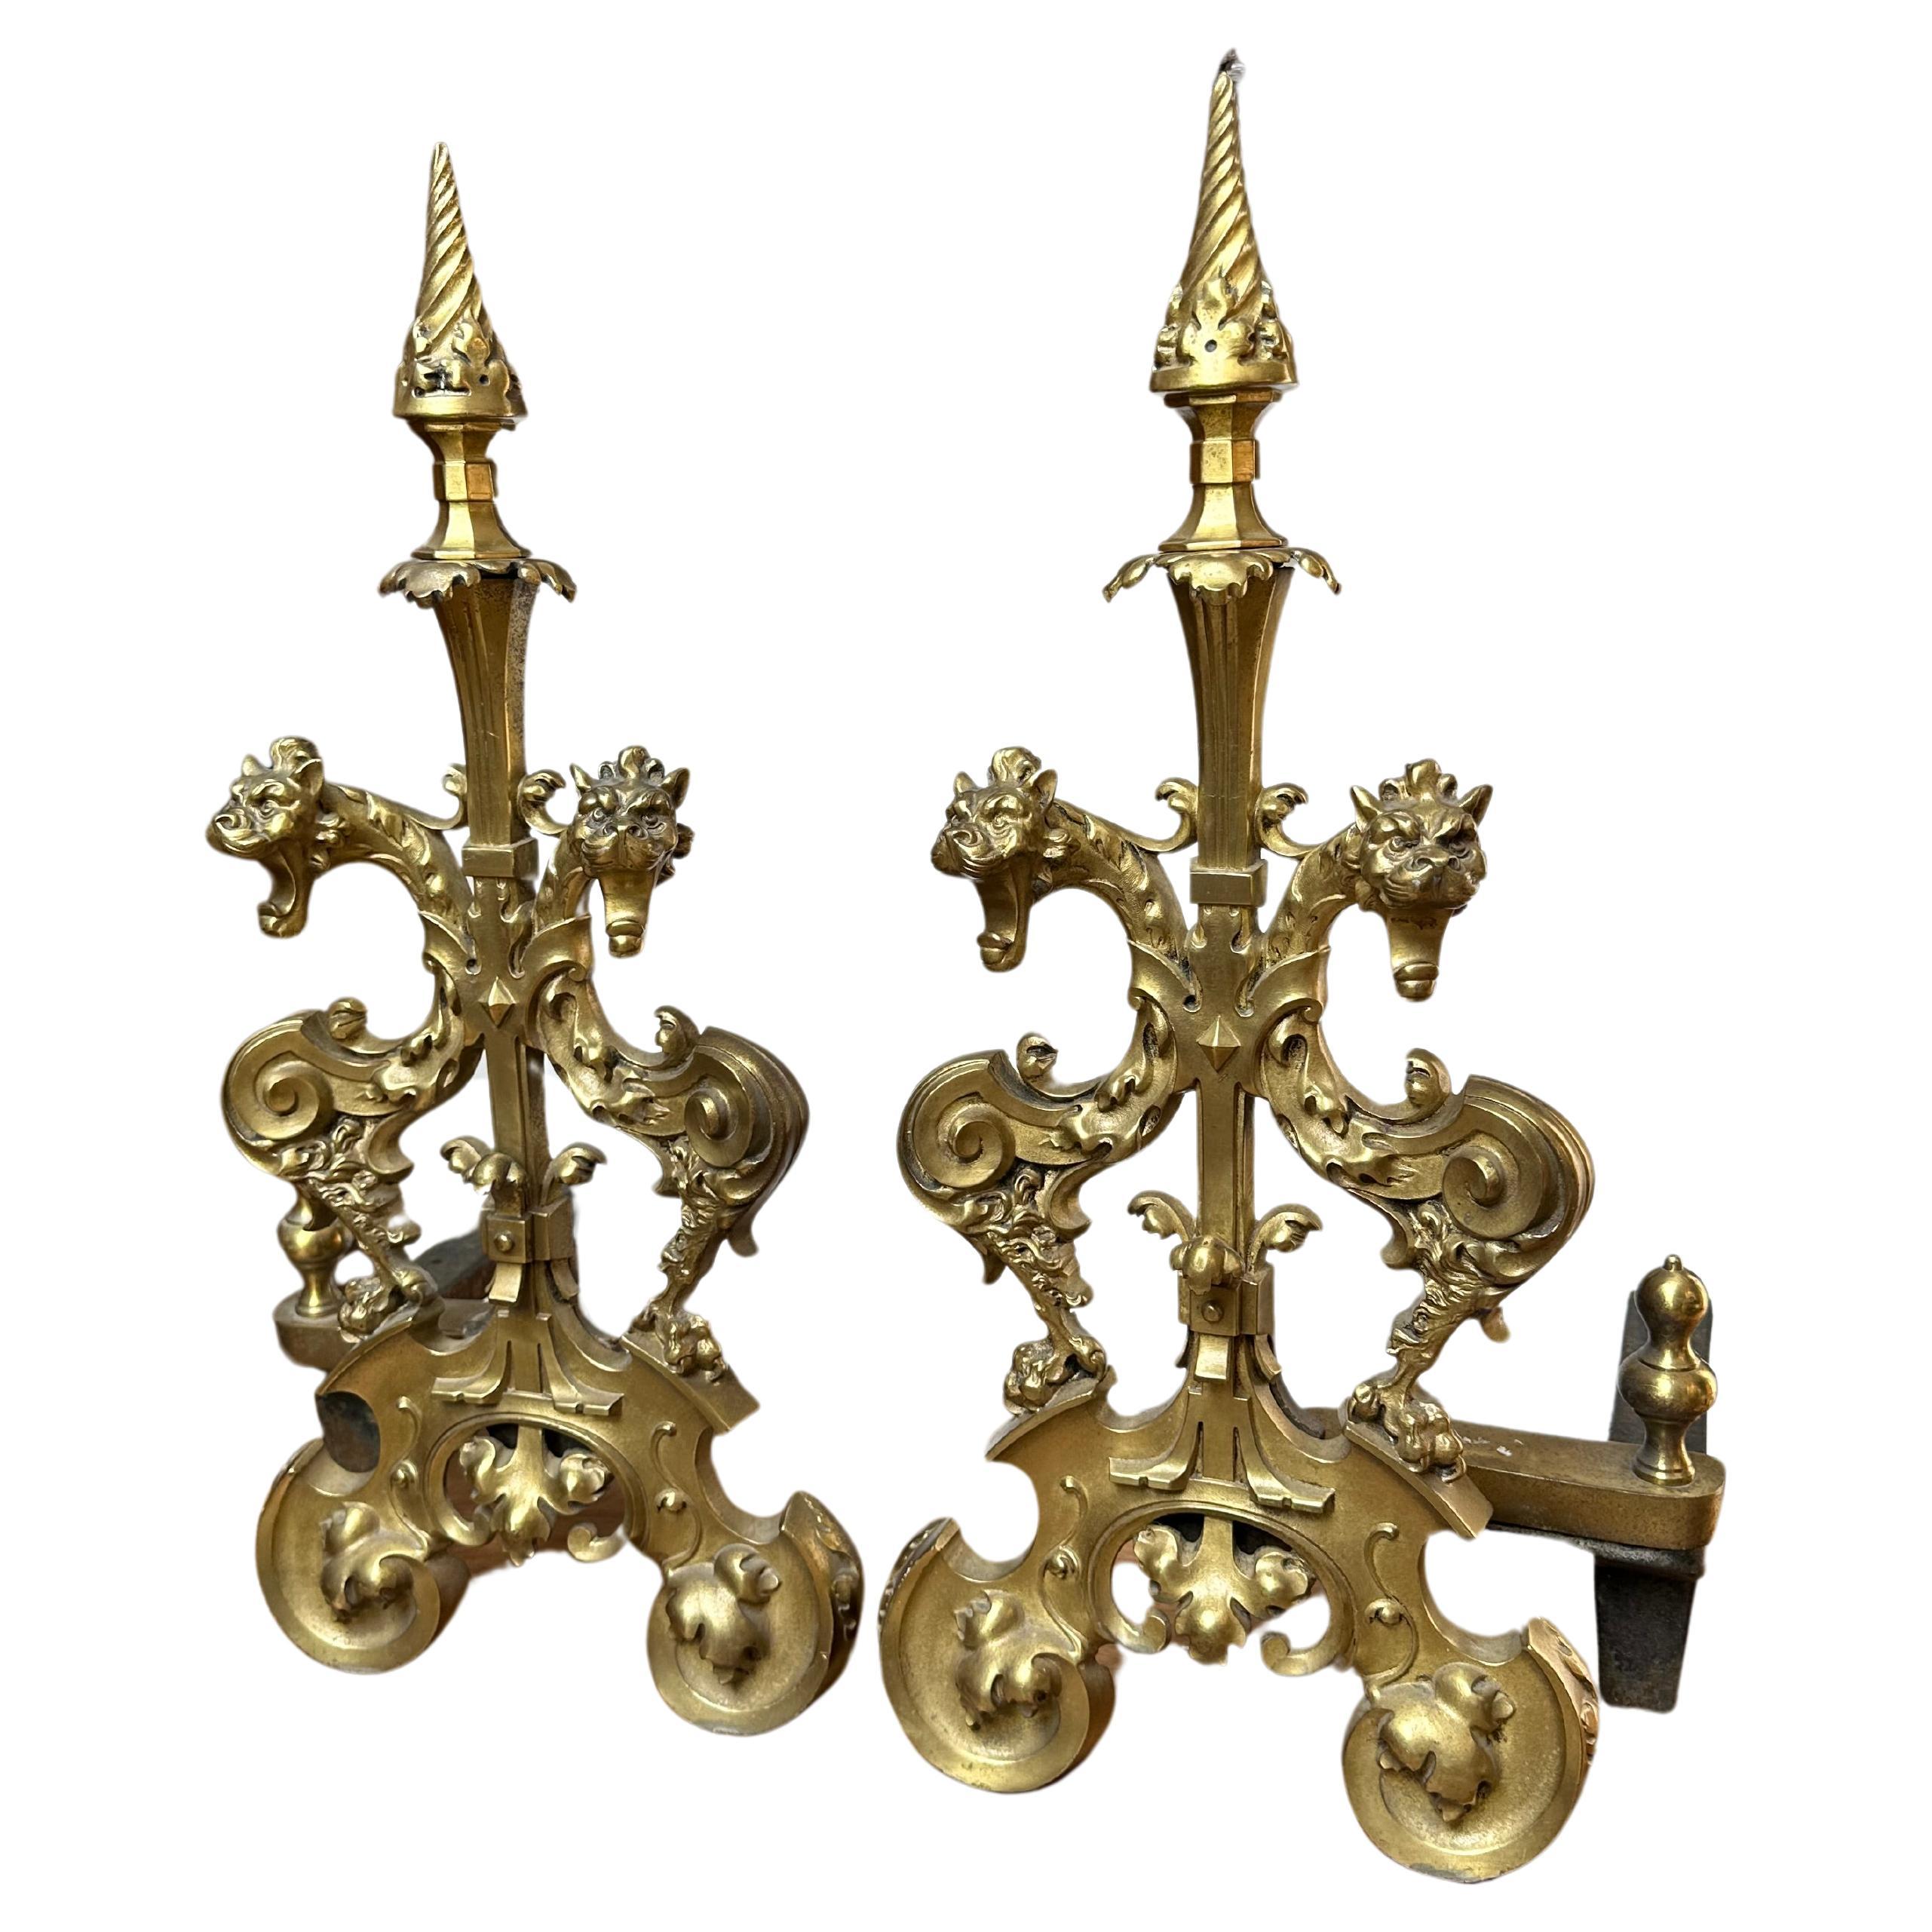 Antique Gothic Revival Gilt Bronze Dragon Andirons or Firedogs / Fireplace Tools For Sale